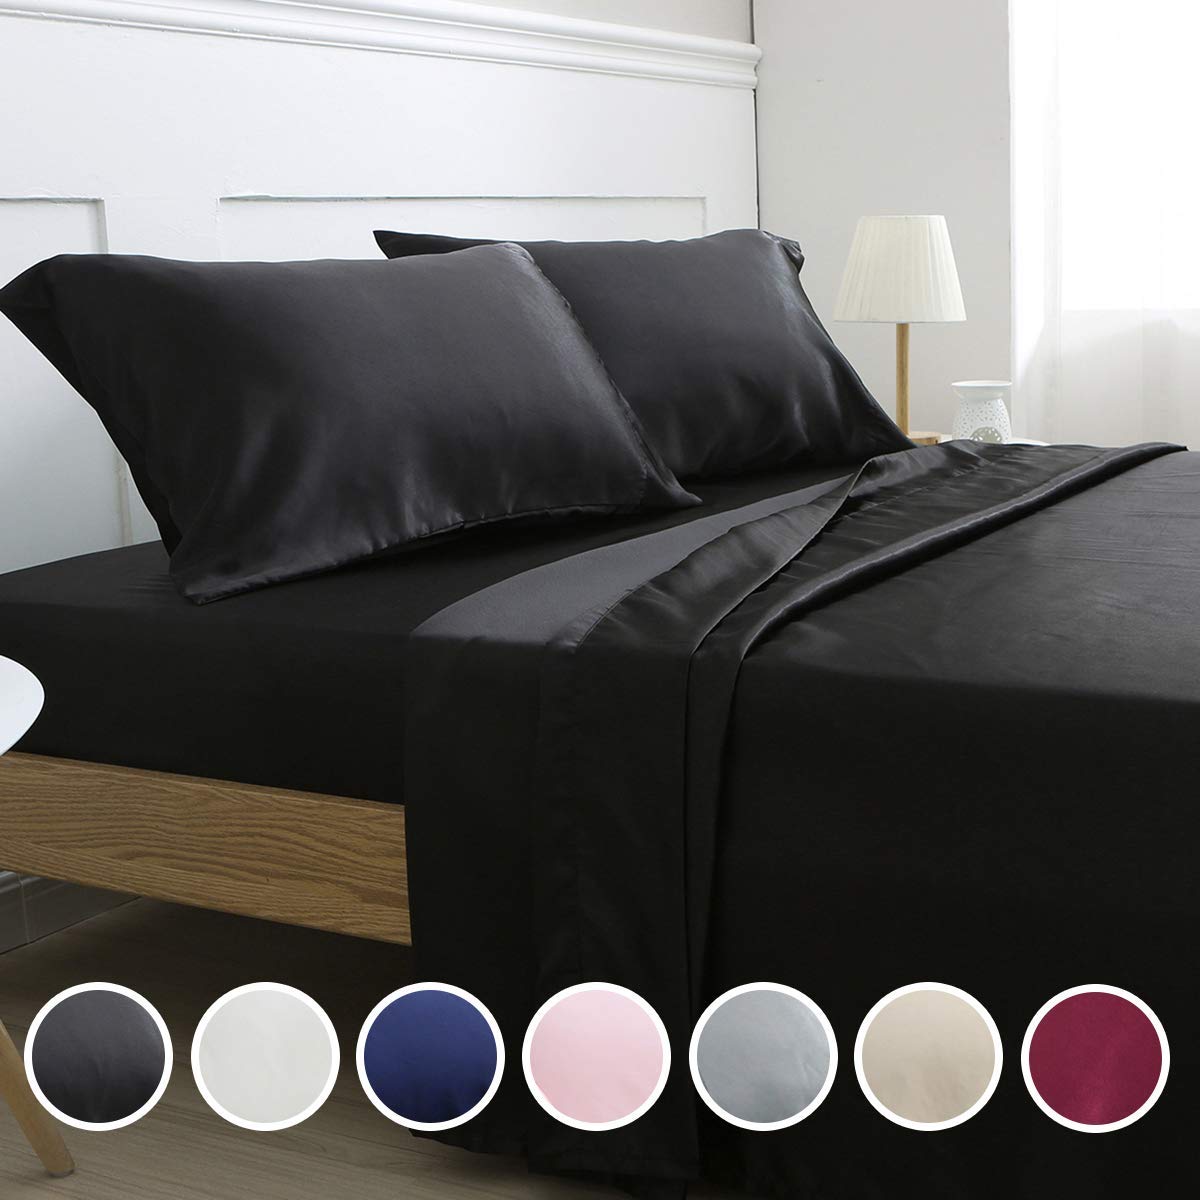 Vonty Satin Sheets Queen Size Silky Soft Satin Bed Sheets Silver